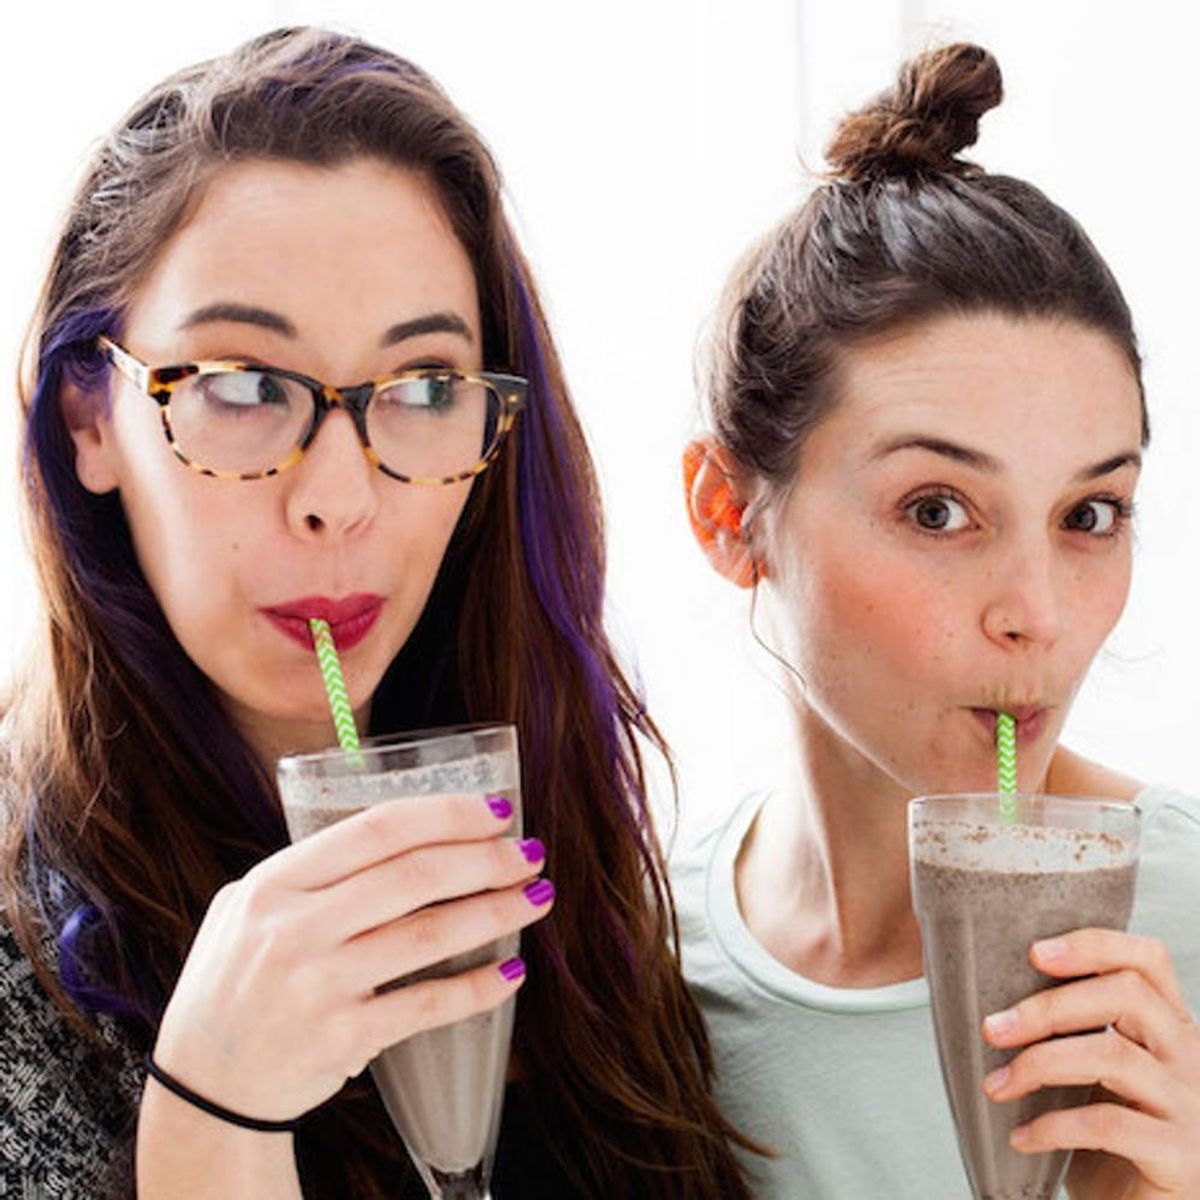 This Restaurant Chain Is Adding Something Crazy to Their Milkshakes